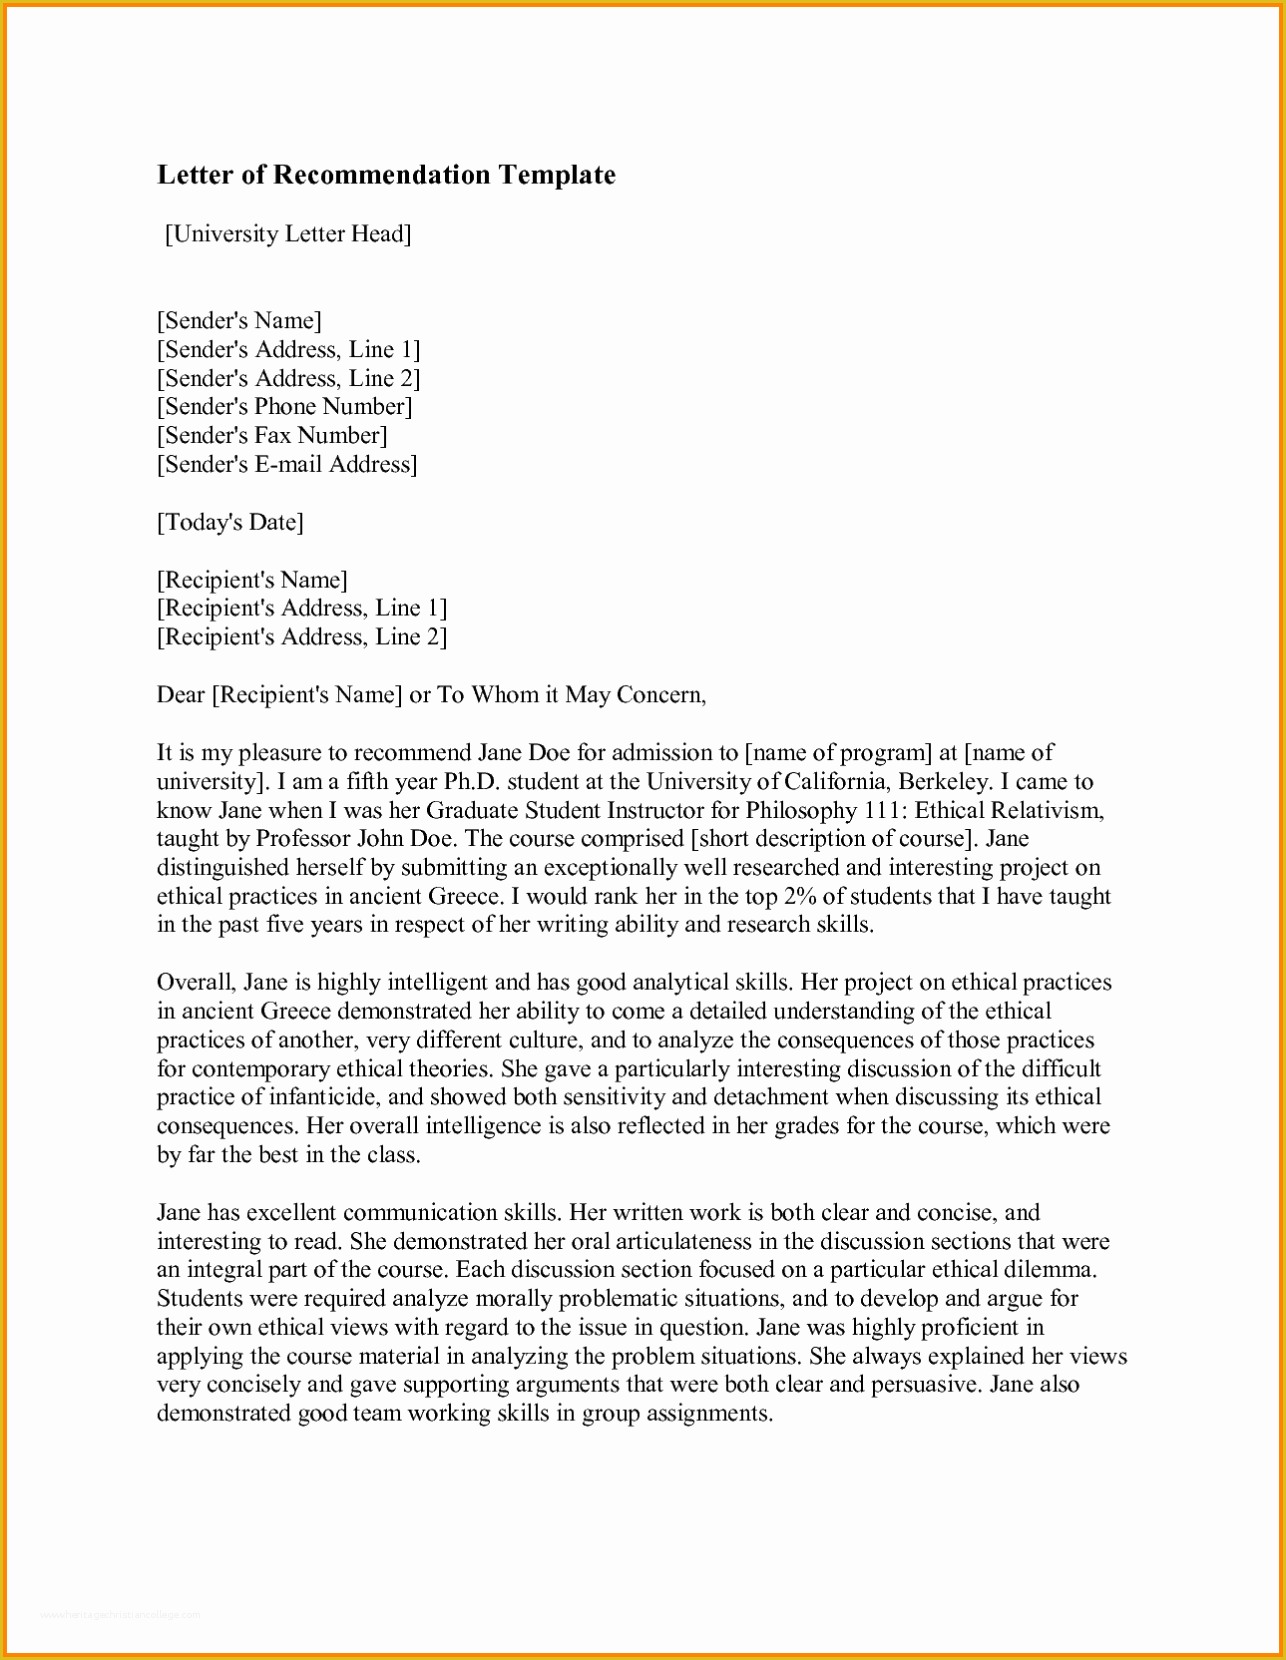 Free Letter Of Recommendation Template Of Writing A Letter Of Re Mendation Template Sample